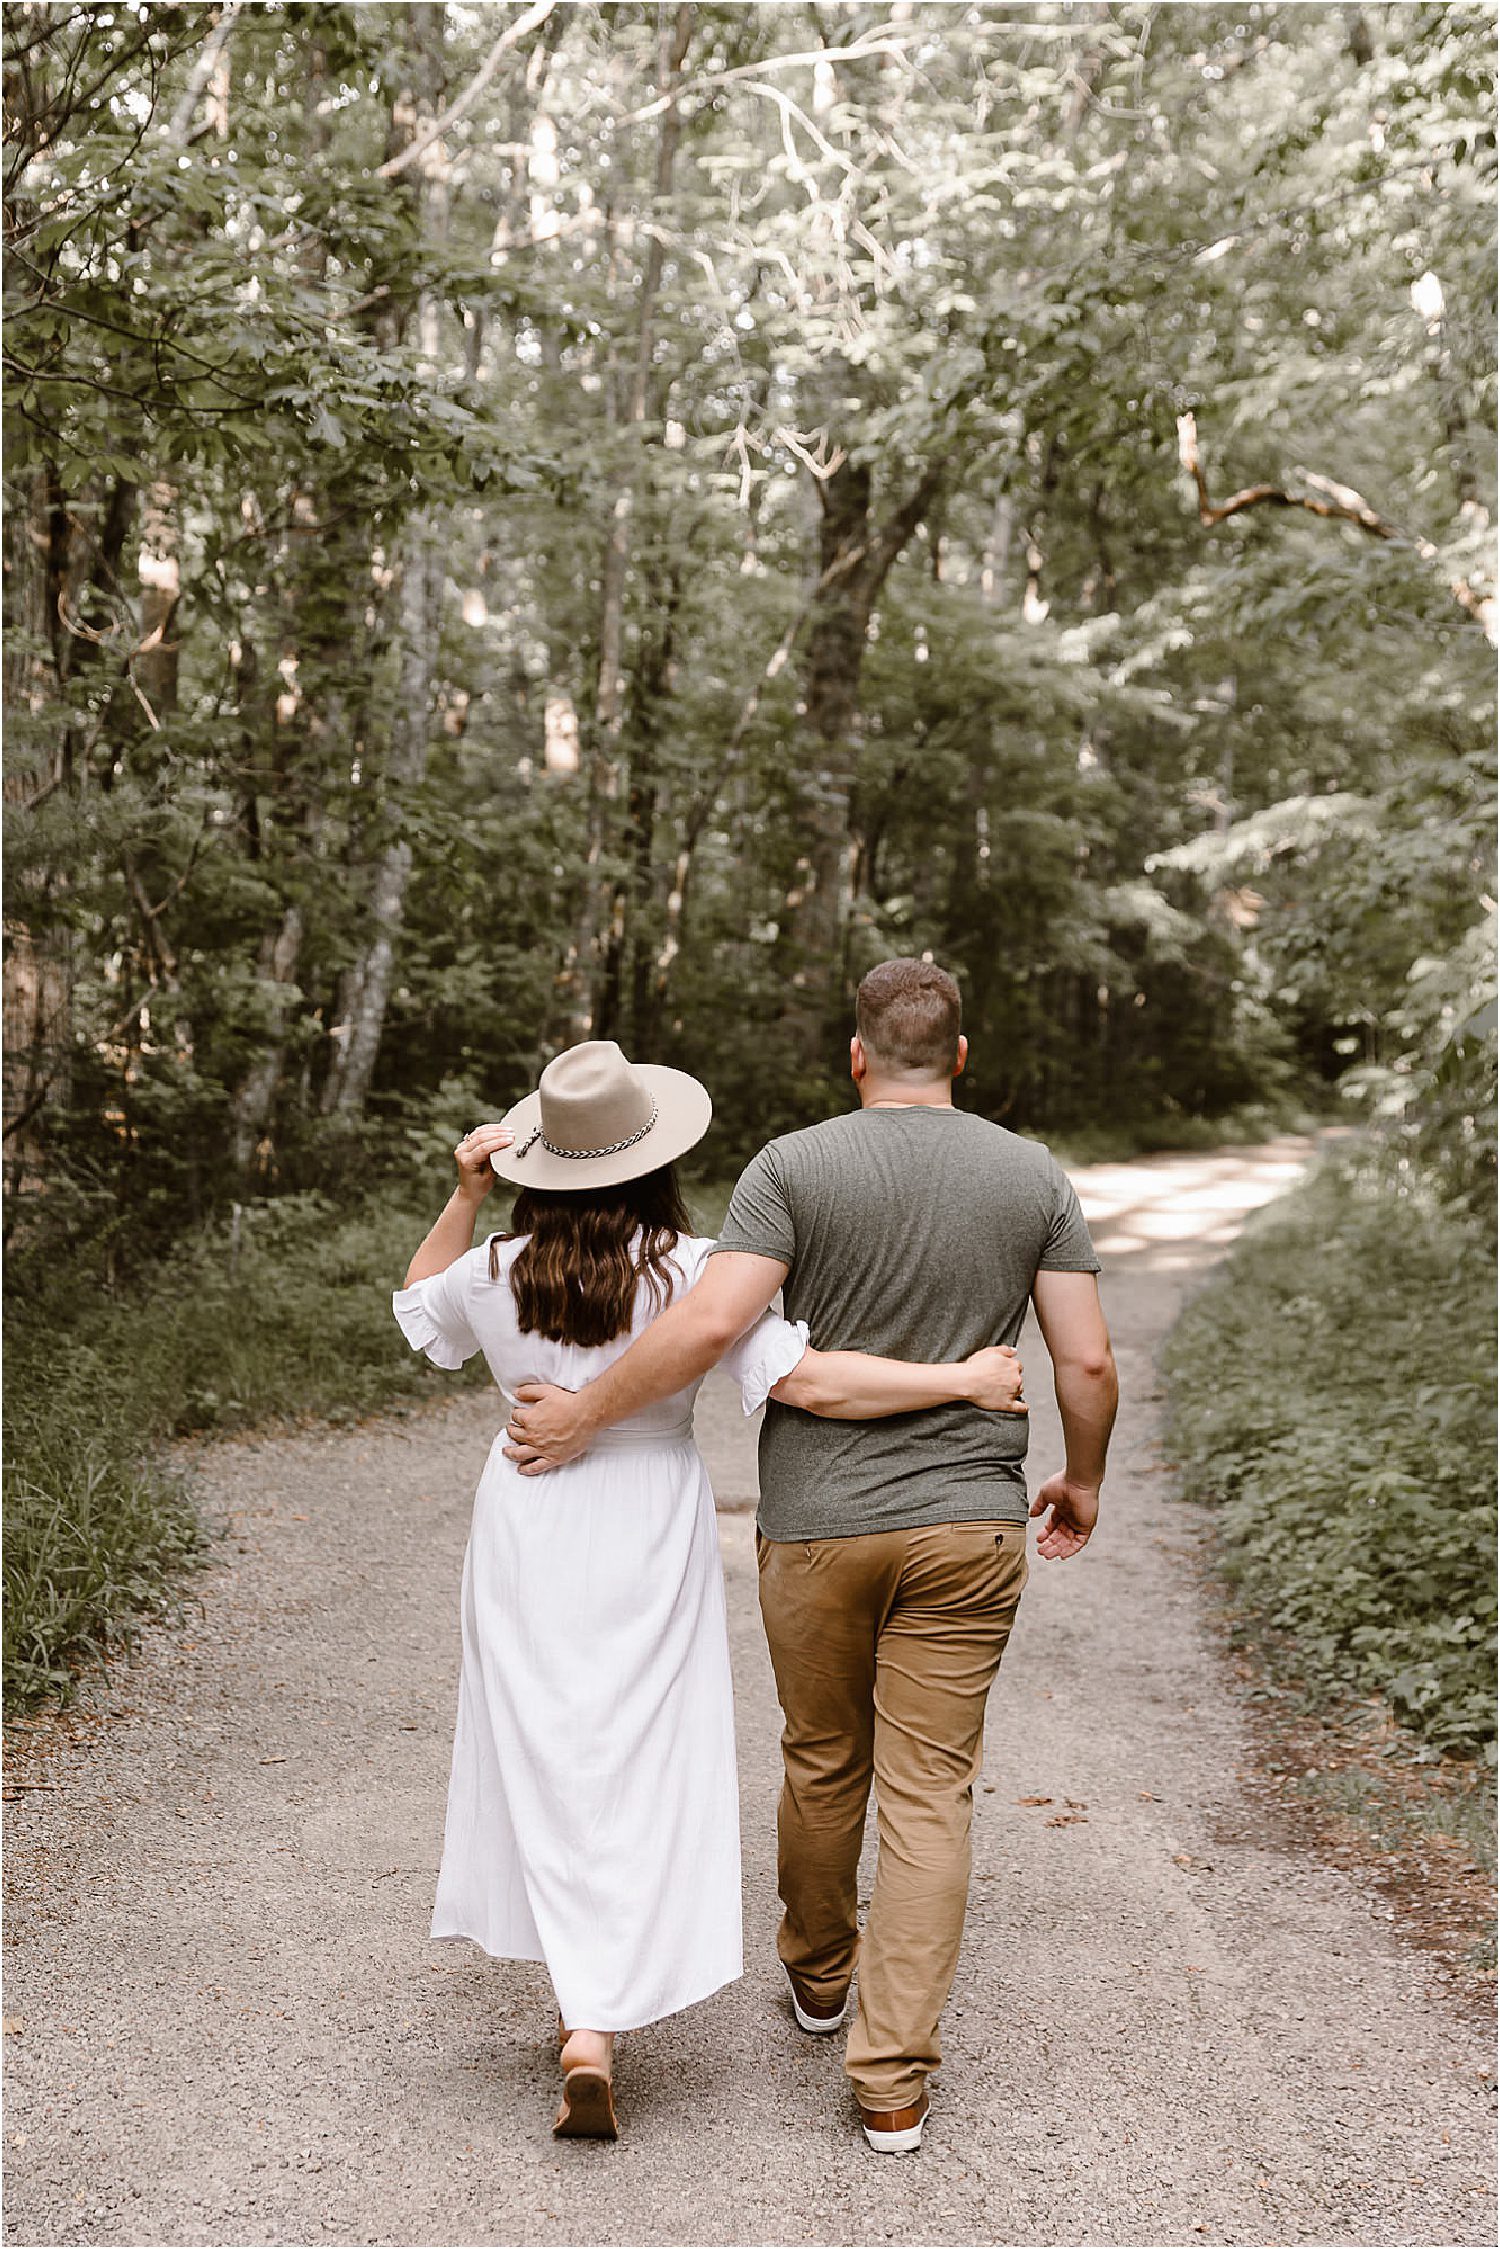 Mini-Sessions in the Smoky Mountains